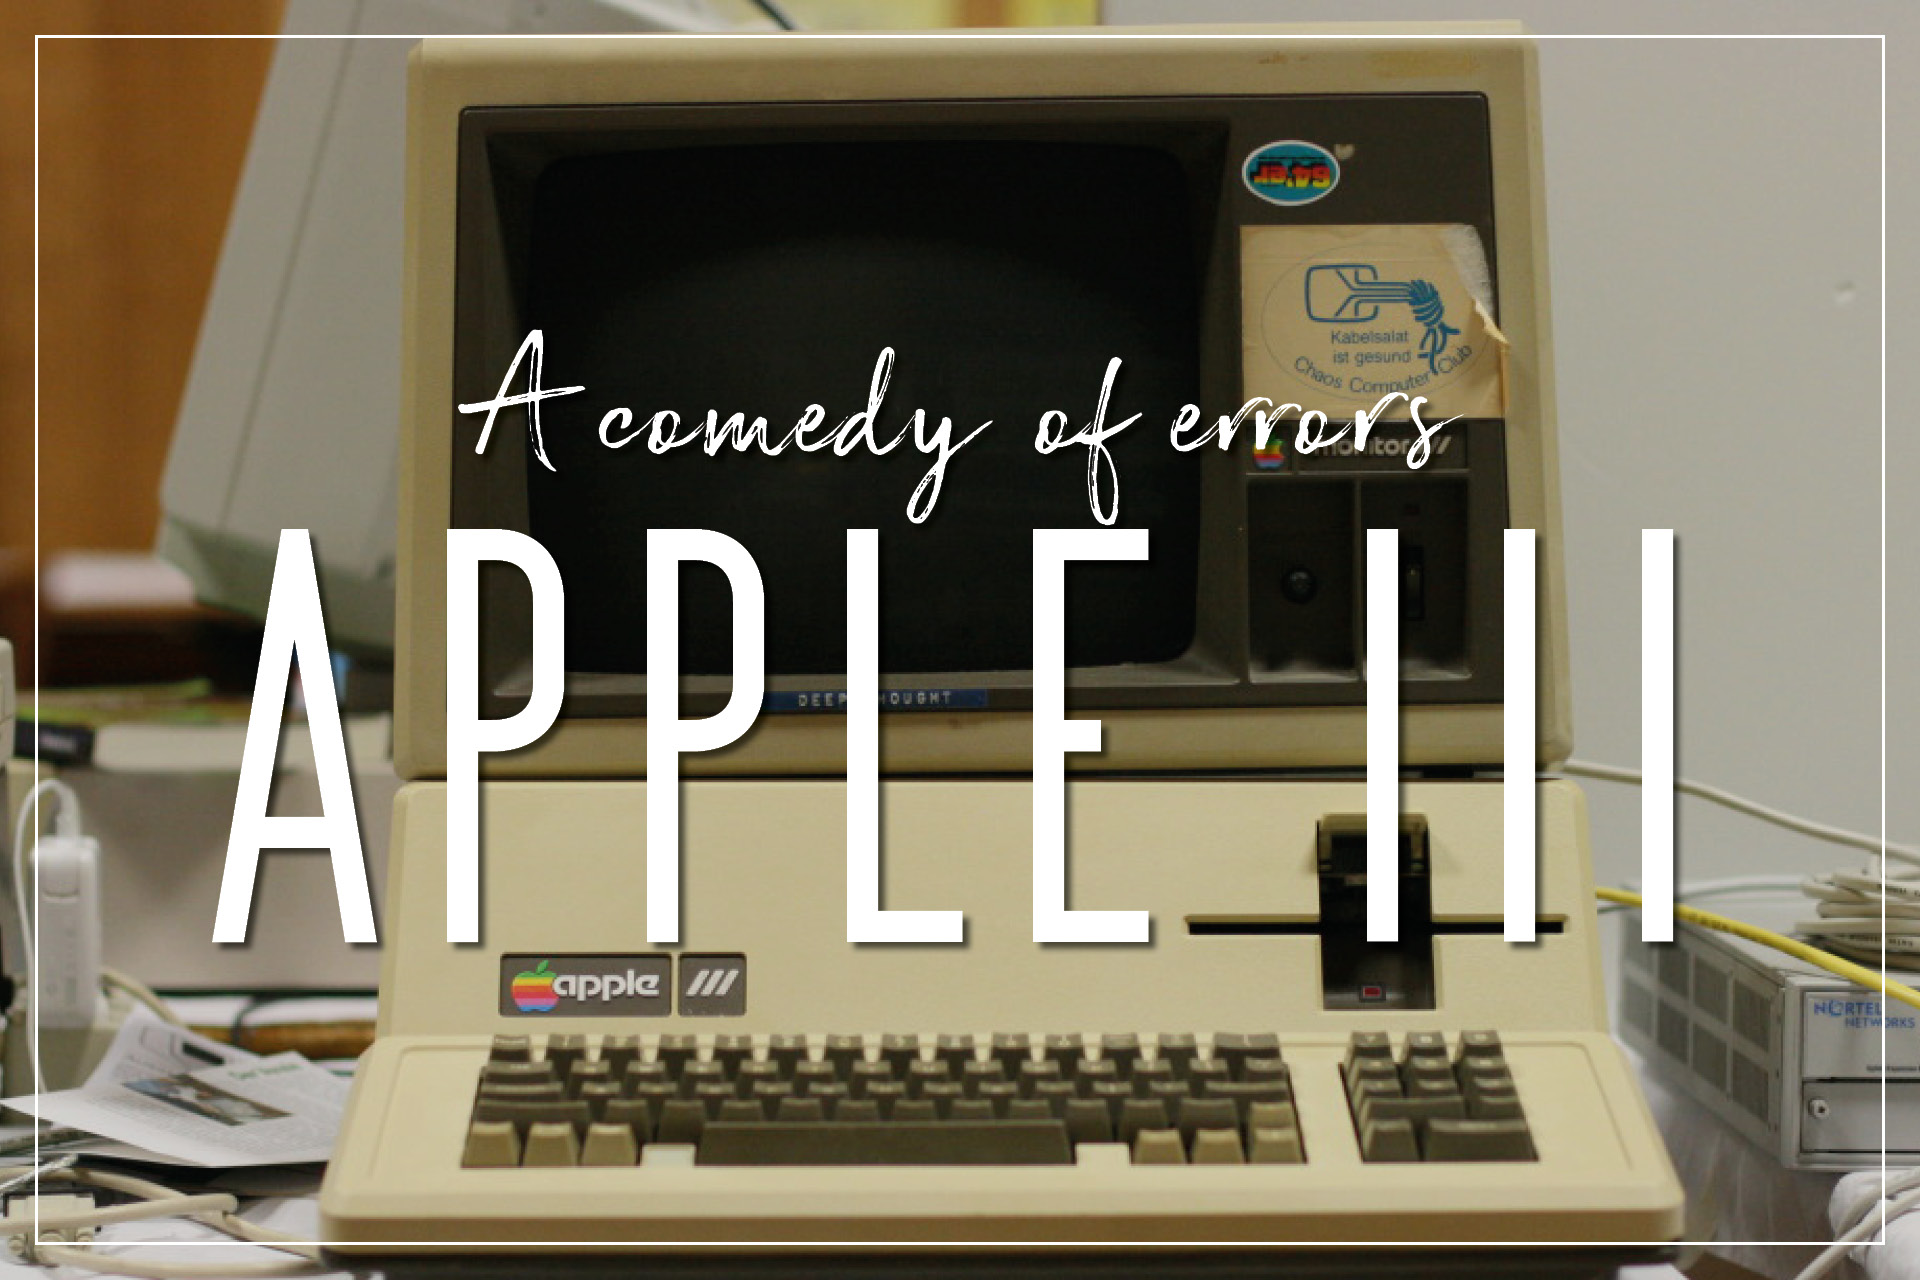 Apple III: A Comedy of Errors - How Apple's Missteps Led to a Tragi-comical Odyssey!